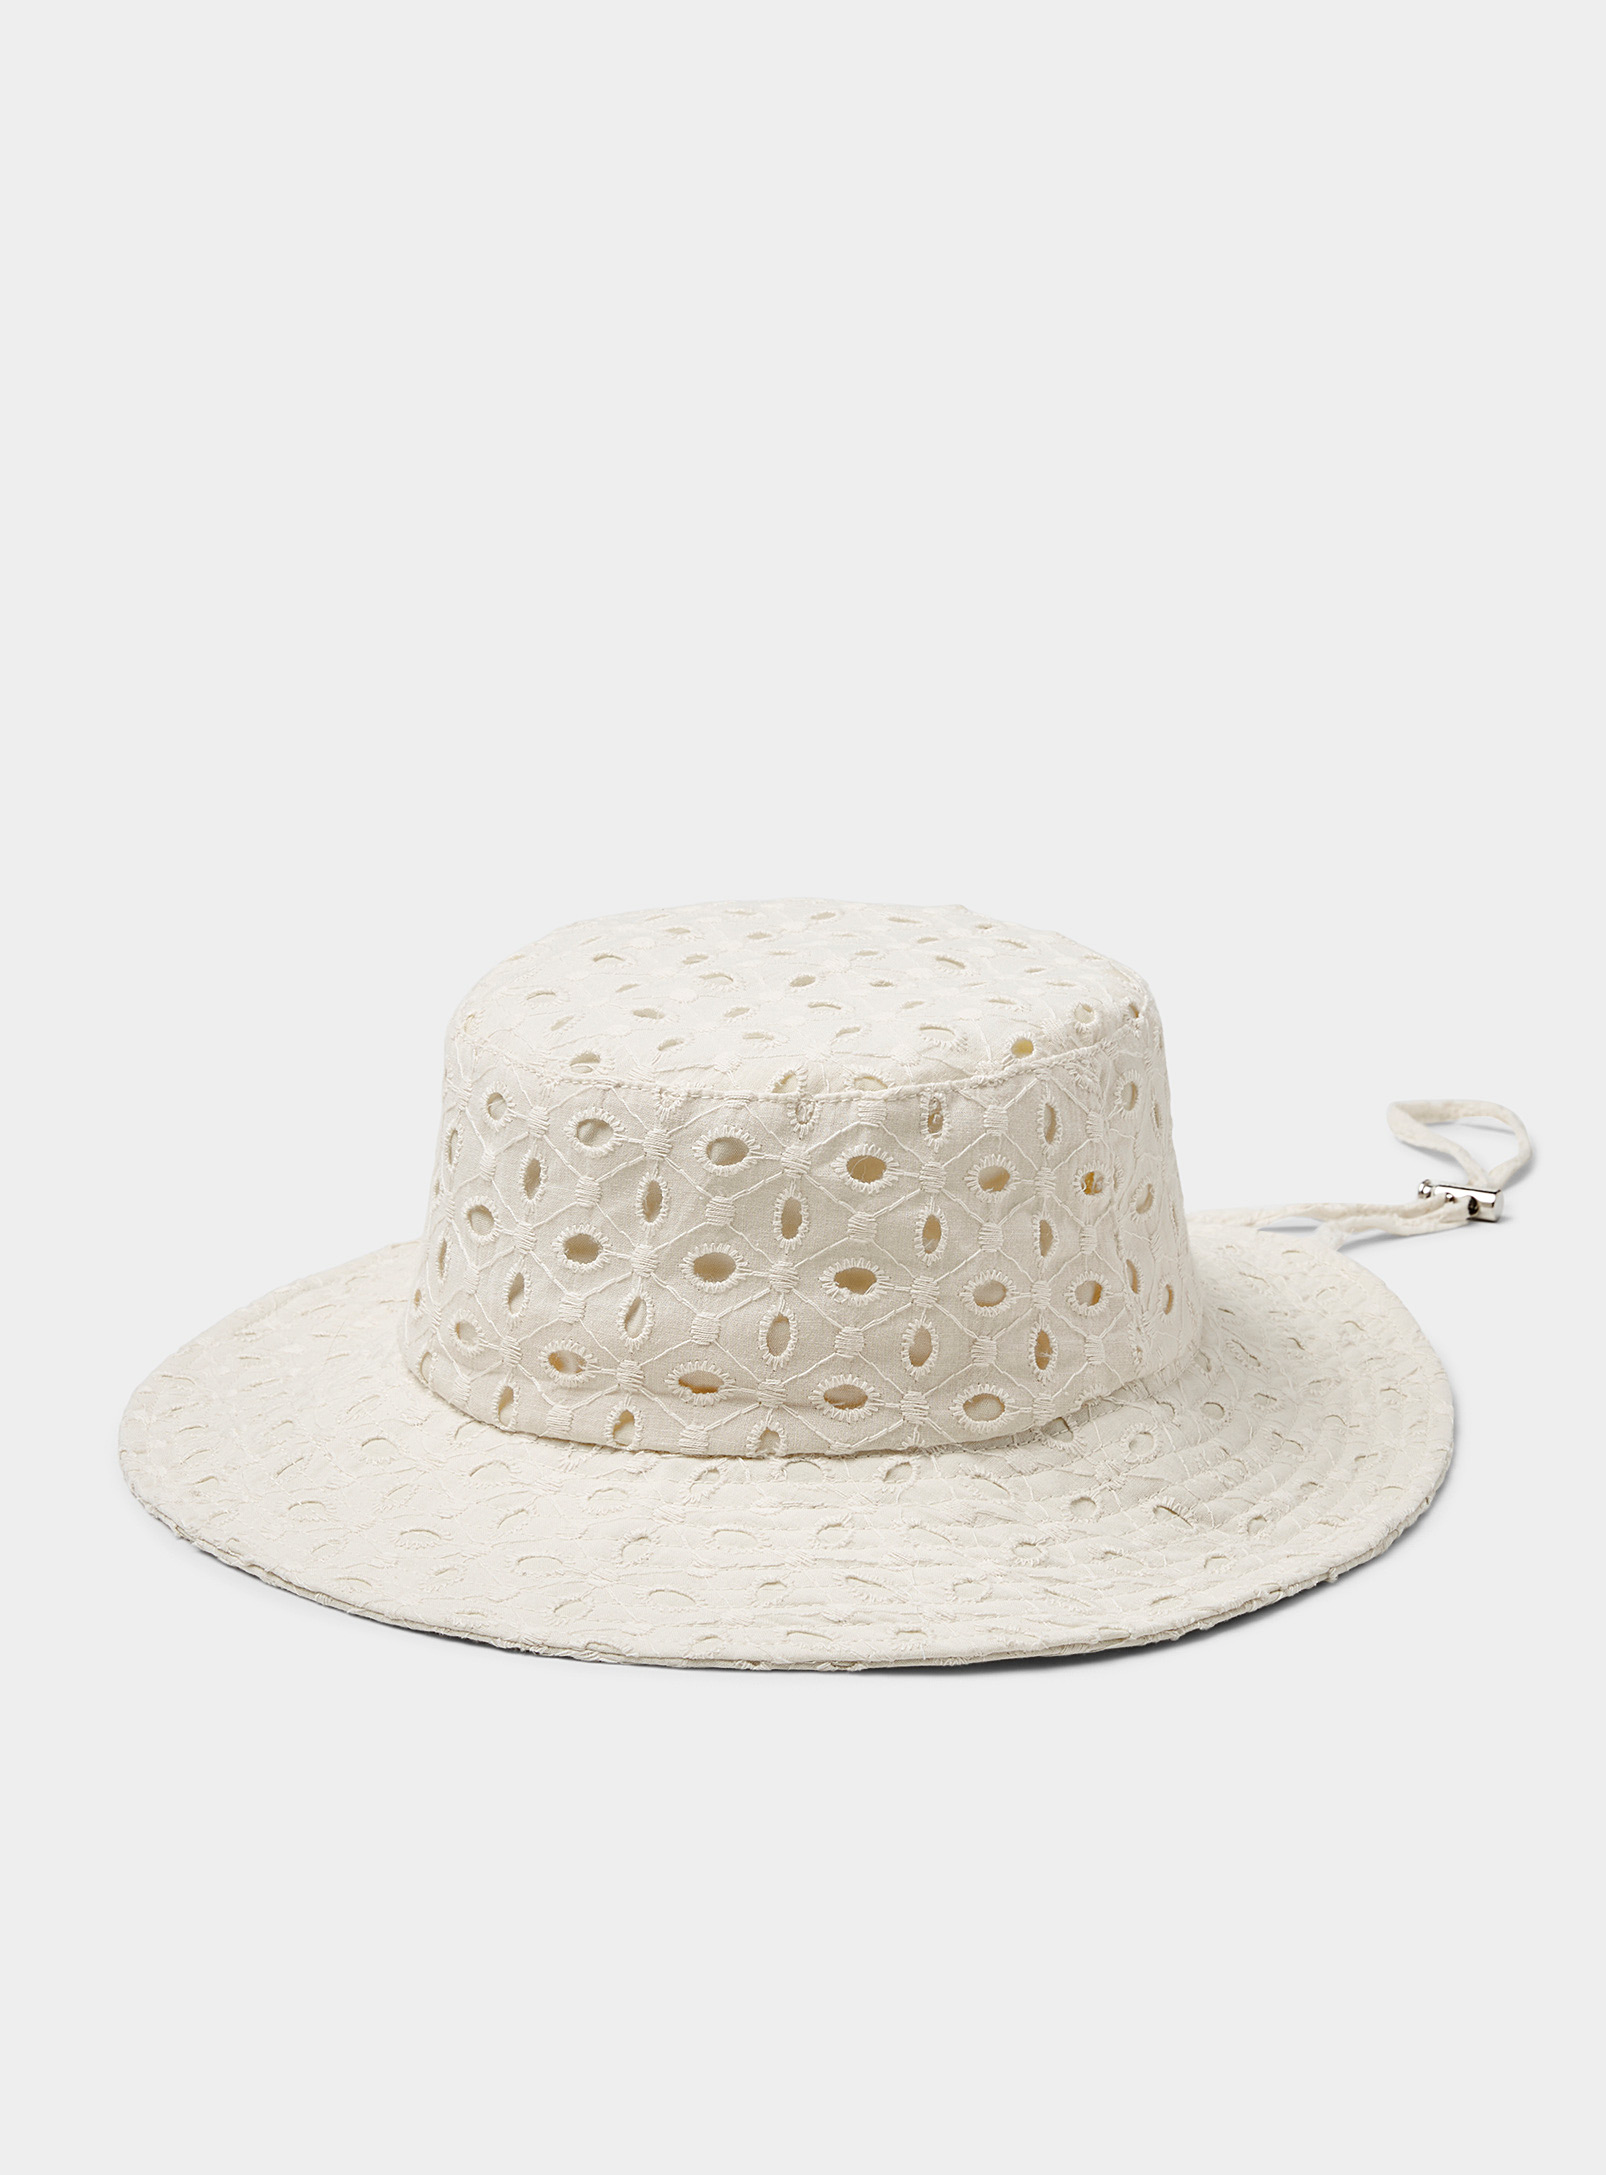 Obey - Men's Vacances broderie anglaise bucket hat